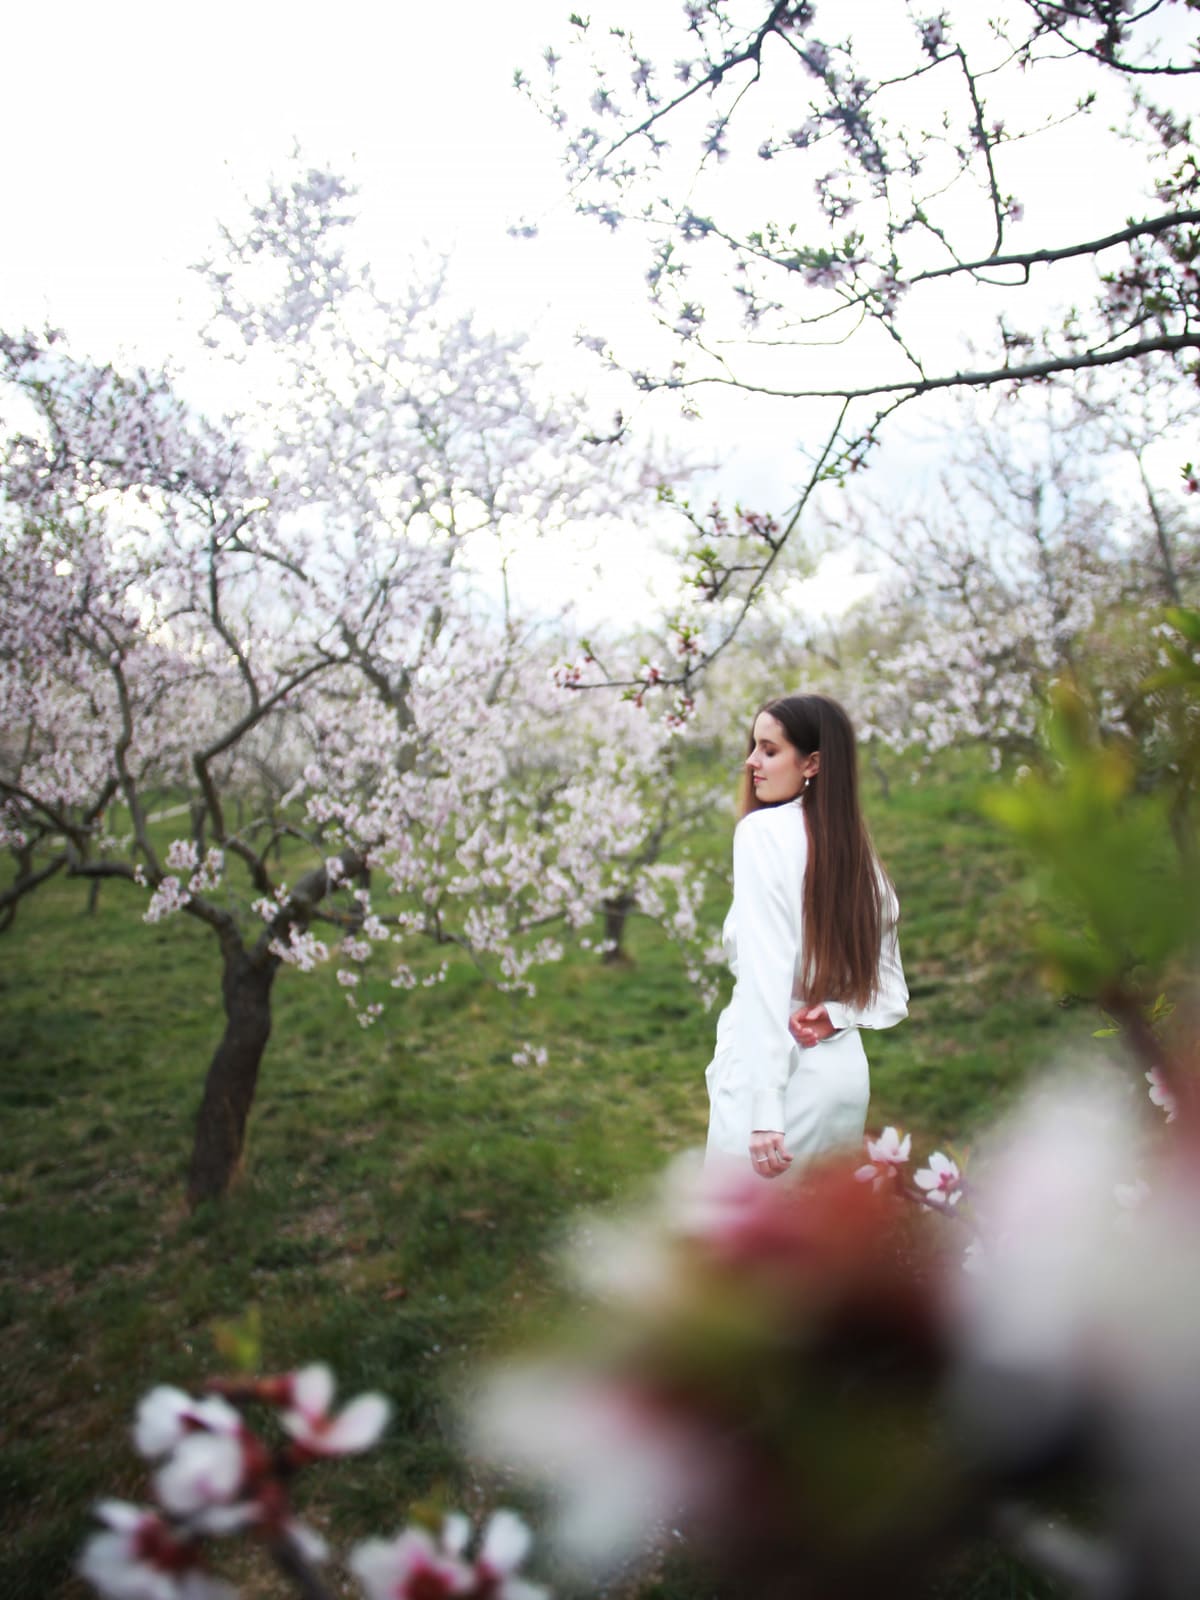 Photoshoot with blossom trees in Prague